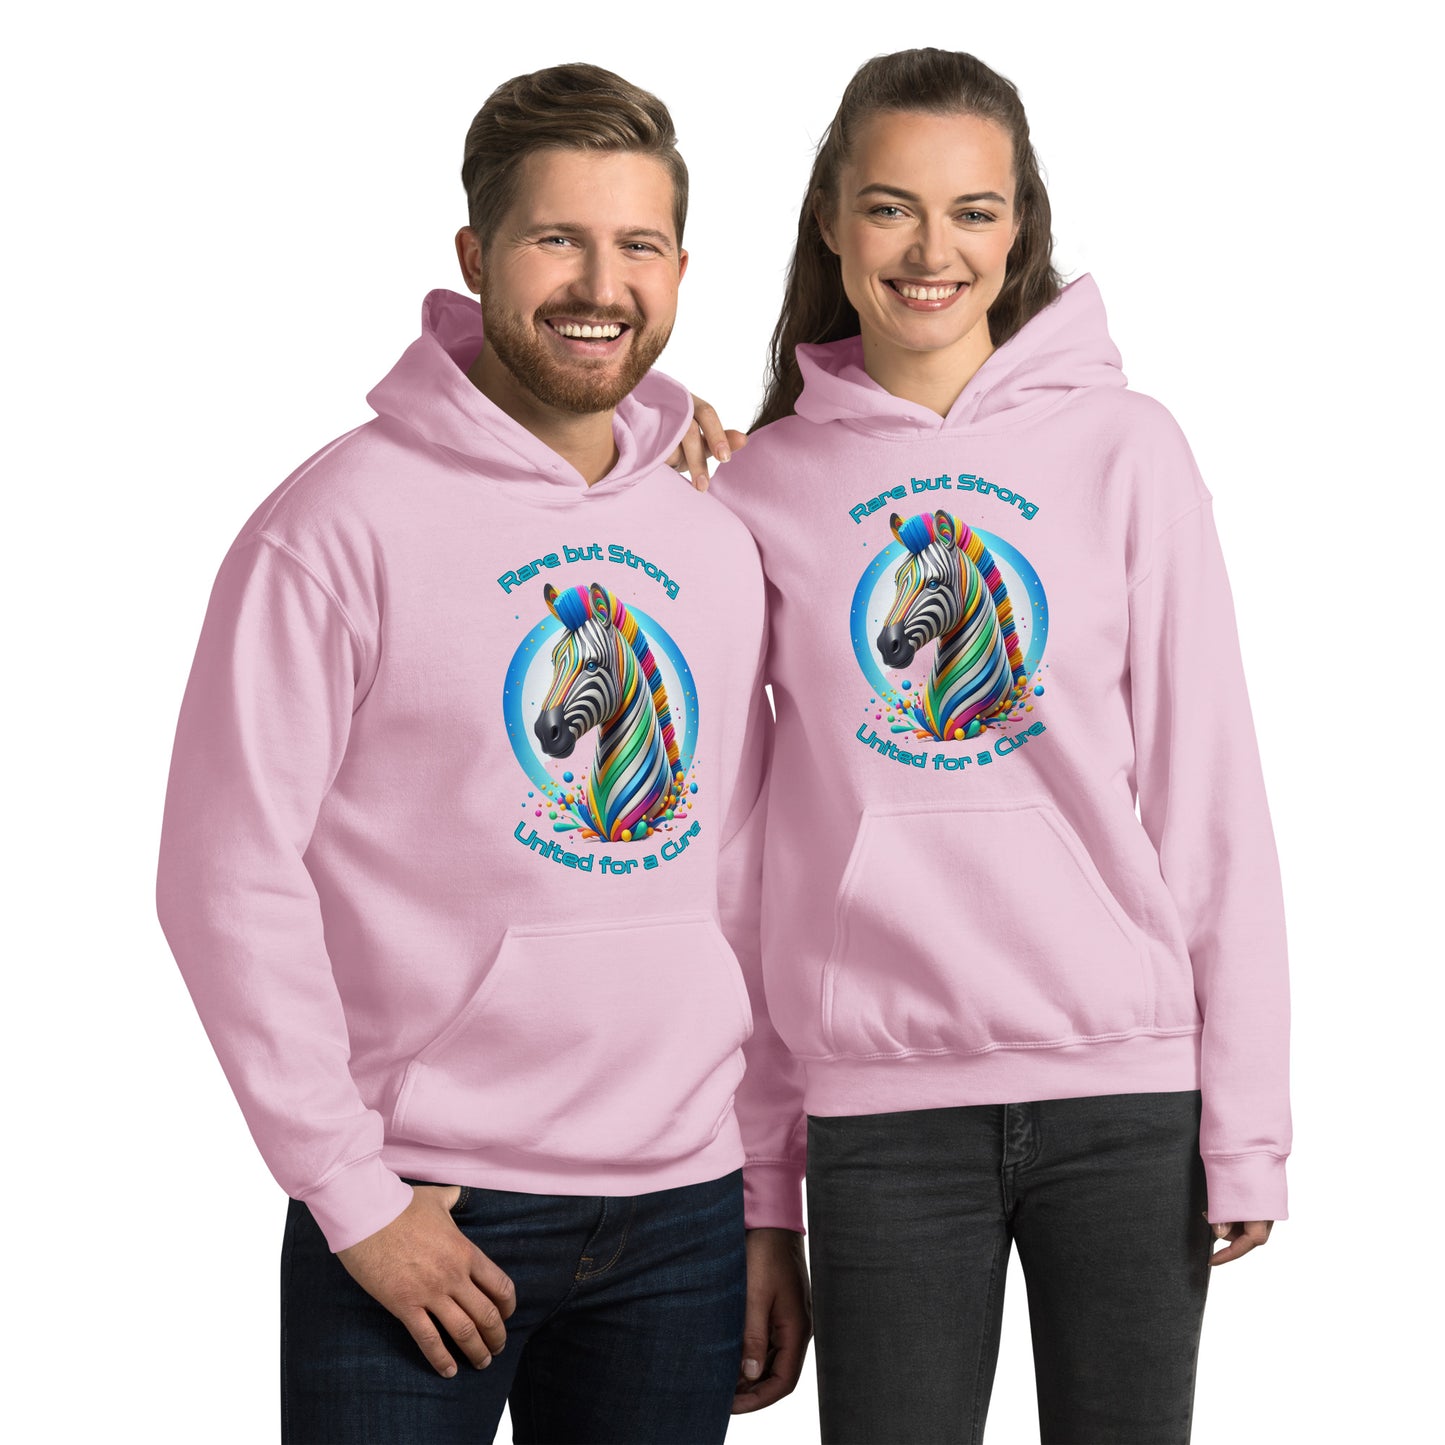 Rare but Strong United for a Cure Unisex Hoodie